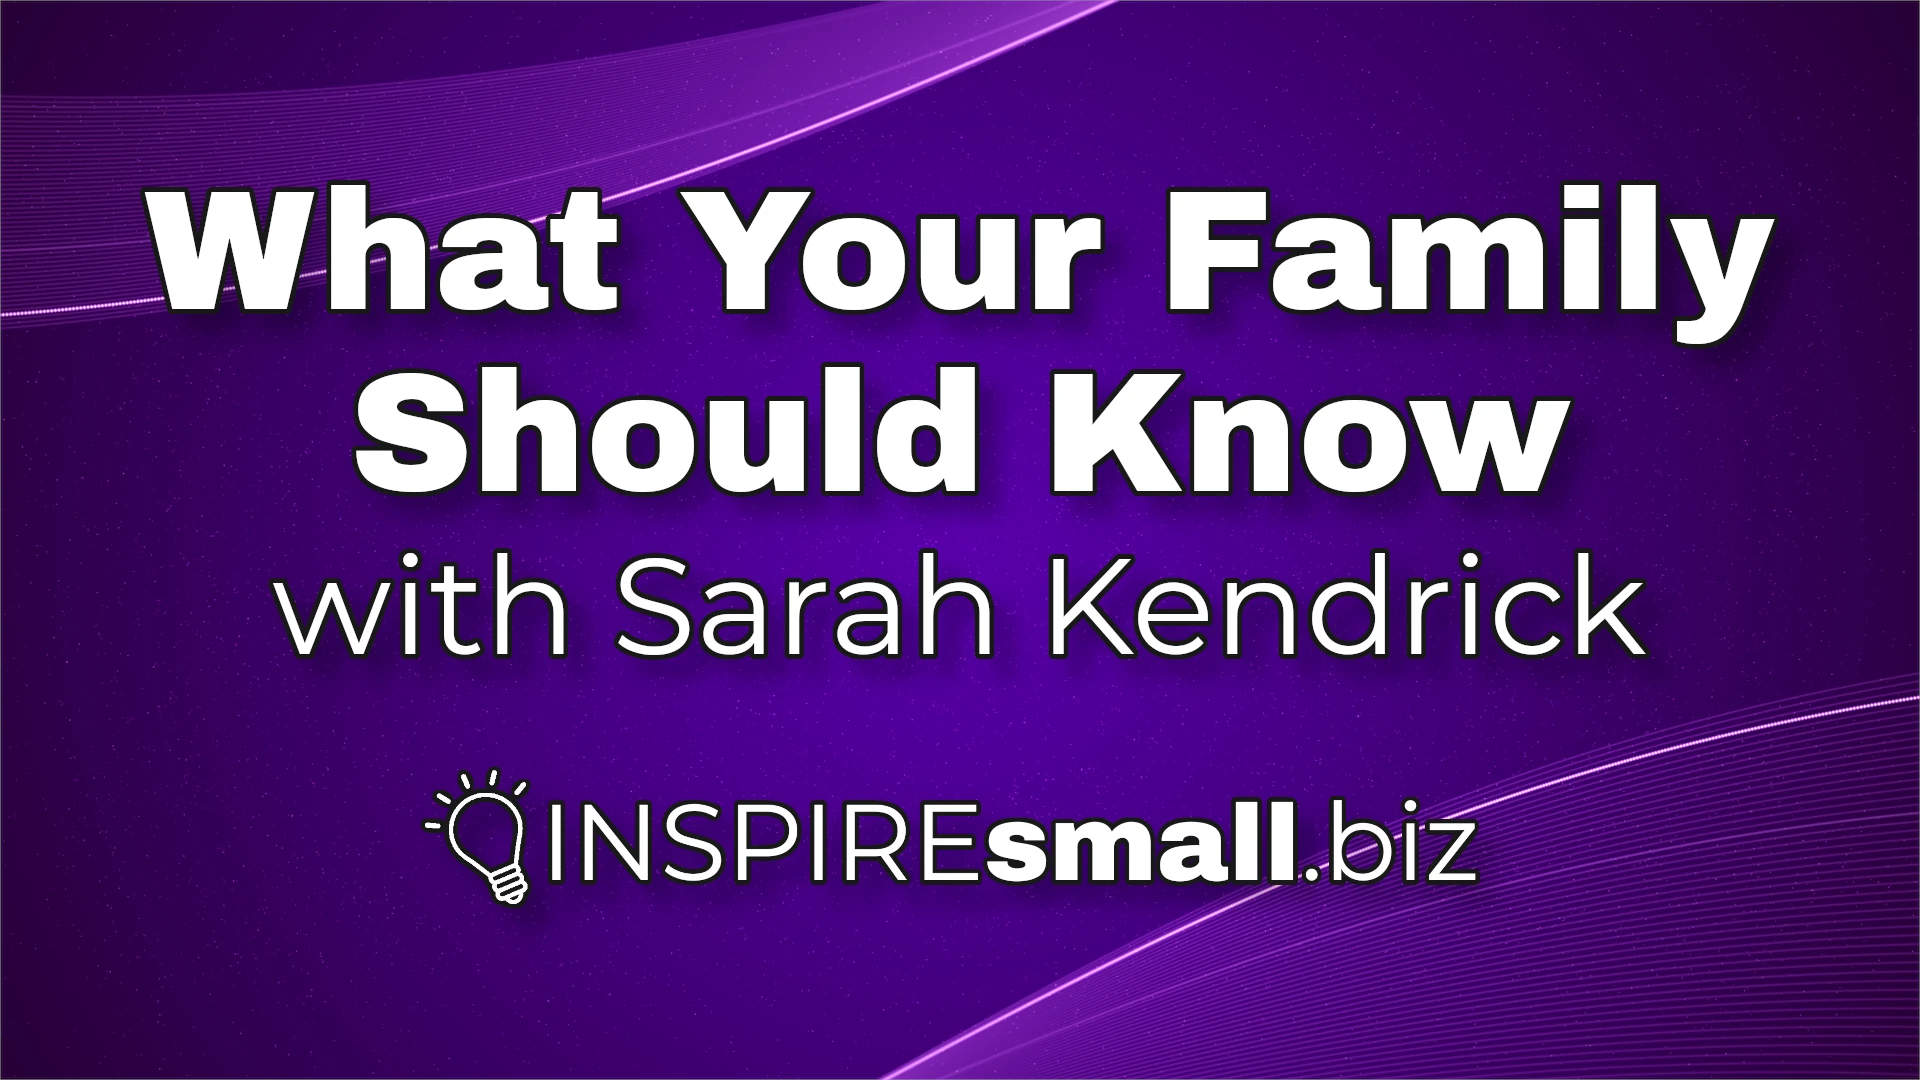 What Your Family Should Know with Sarah Rendrick,hosted by INSPIREsmall.biz over a swirly purple background.